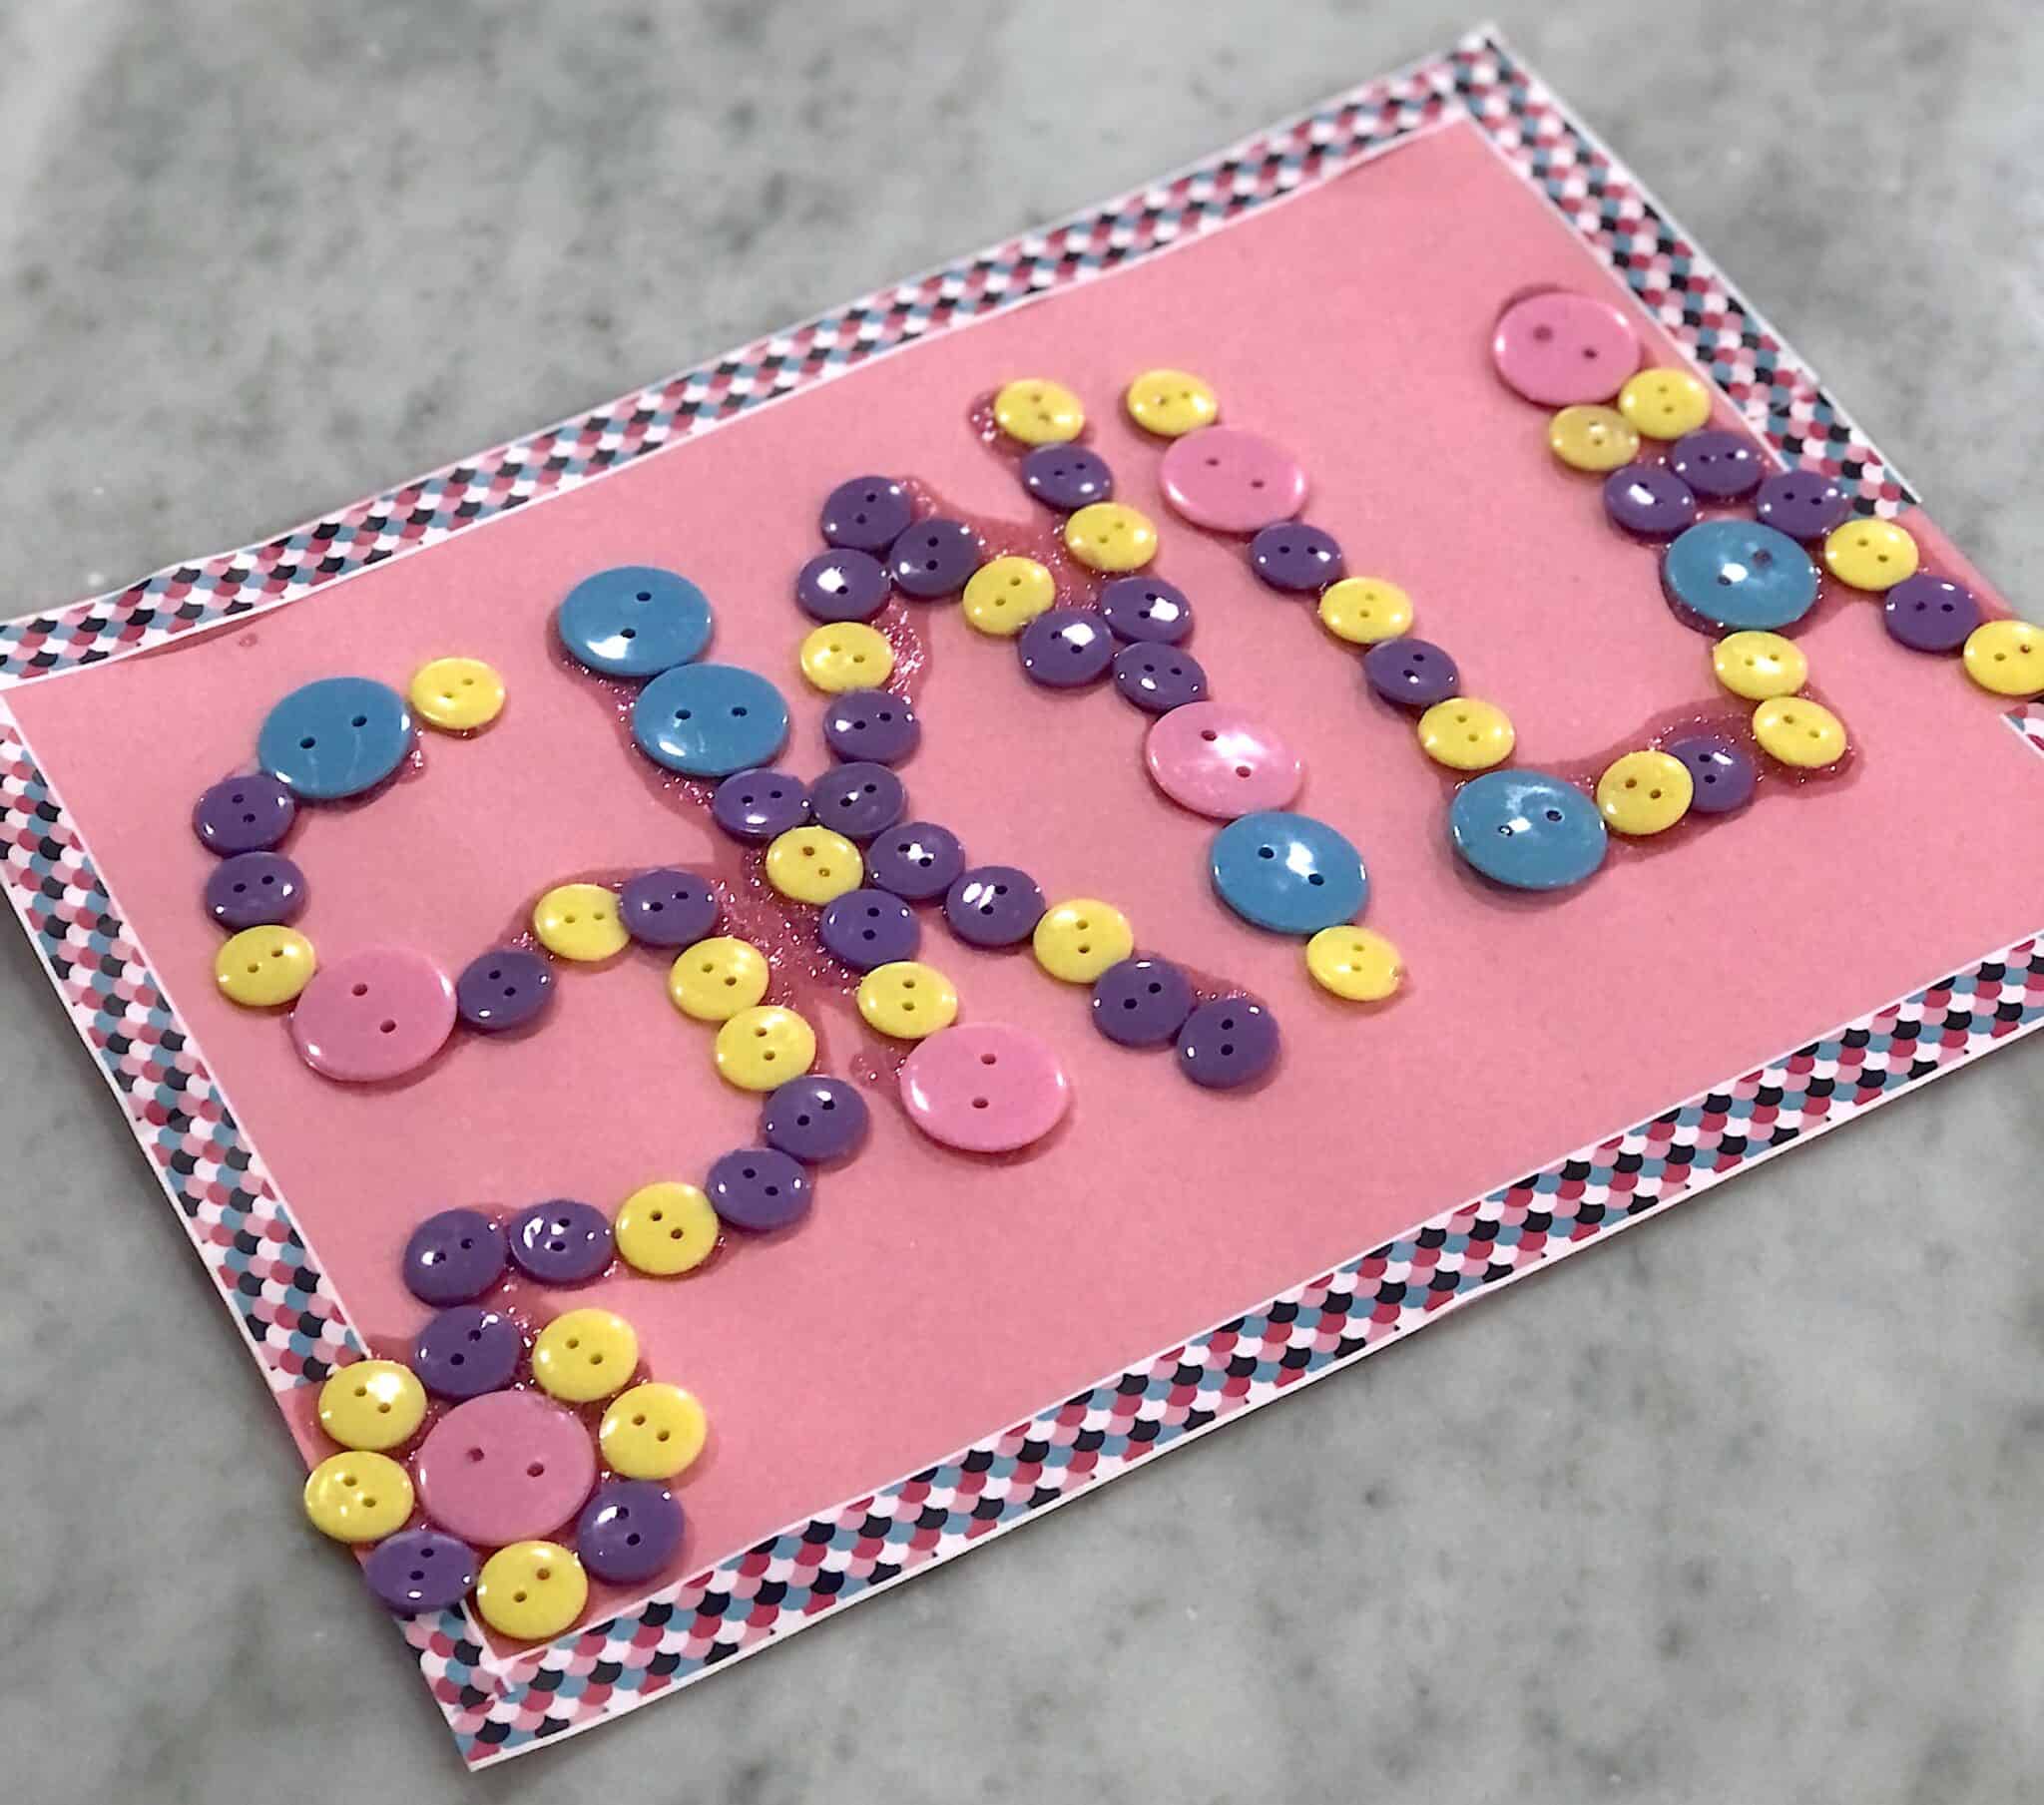 Looking for Sensory Activities That Toddlers Will Love? Well Check Out This Water Bead Sensory Bin Activity That Will Keep Your Child Occupied and Learning! #buttoncraftsforkids #buttoncrafts